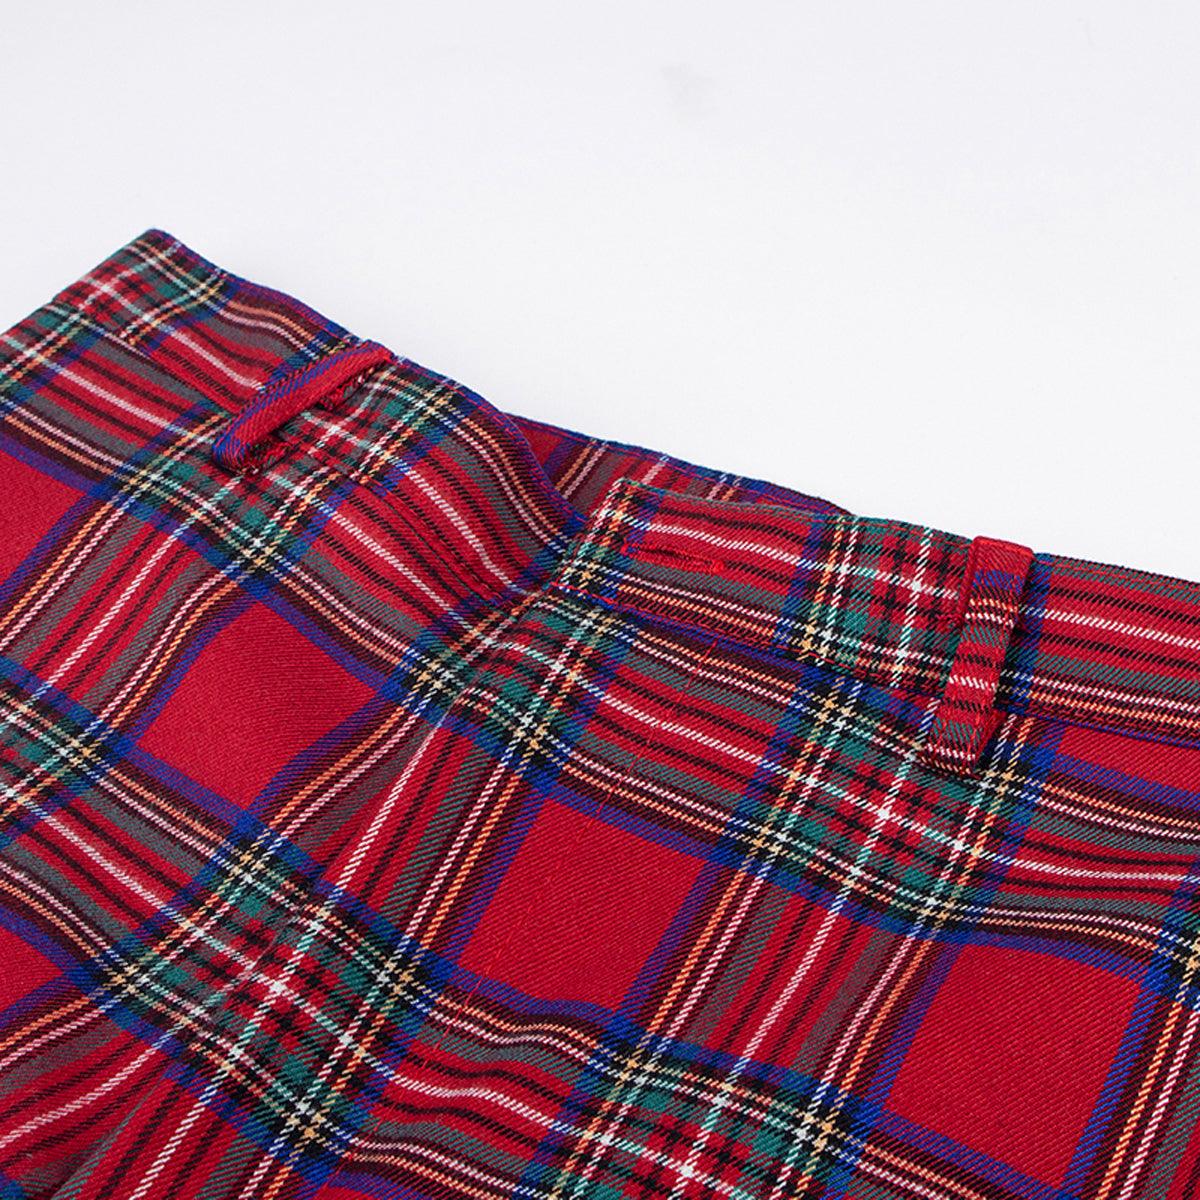 Red Plaid British Punk Aesthetic Pants - Aesthetic Clothes Shop